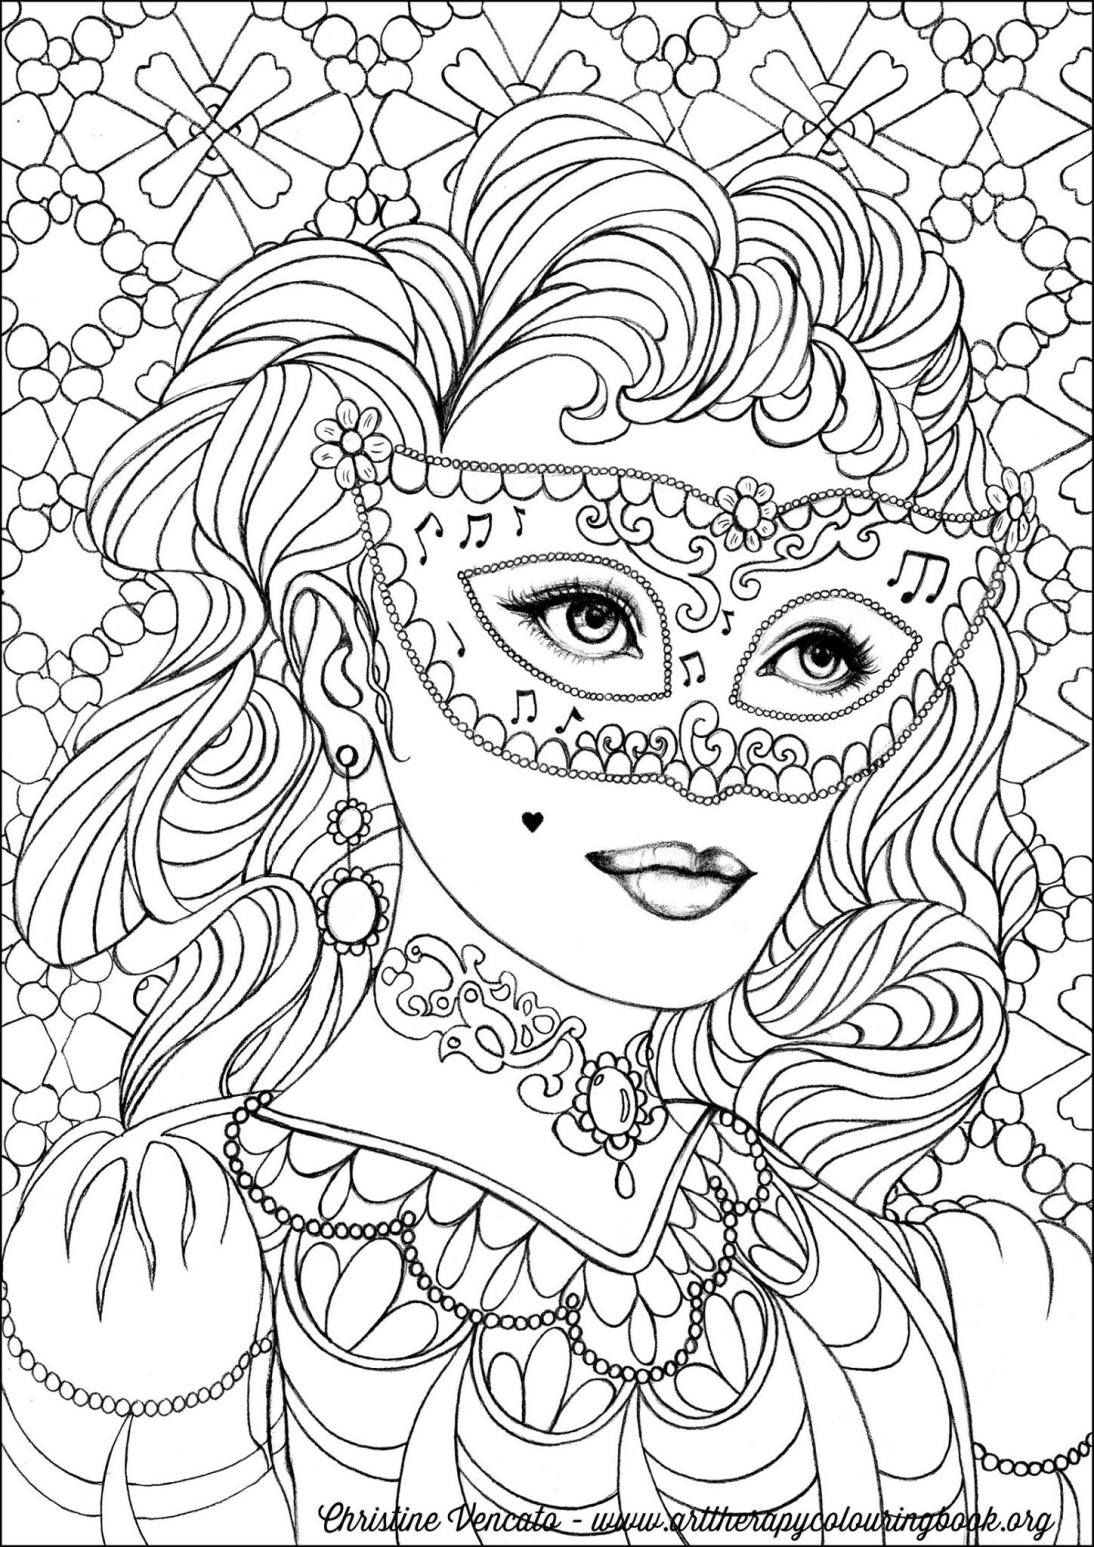 Coloring For Adults Book
 Free Coloring Page From Adult Coloring Worldwide Art by